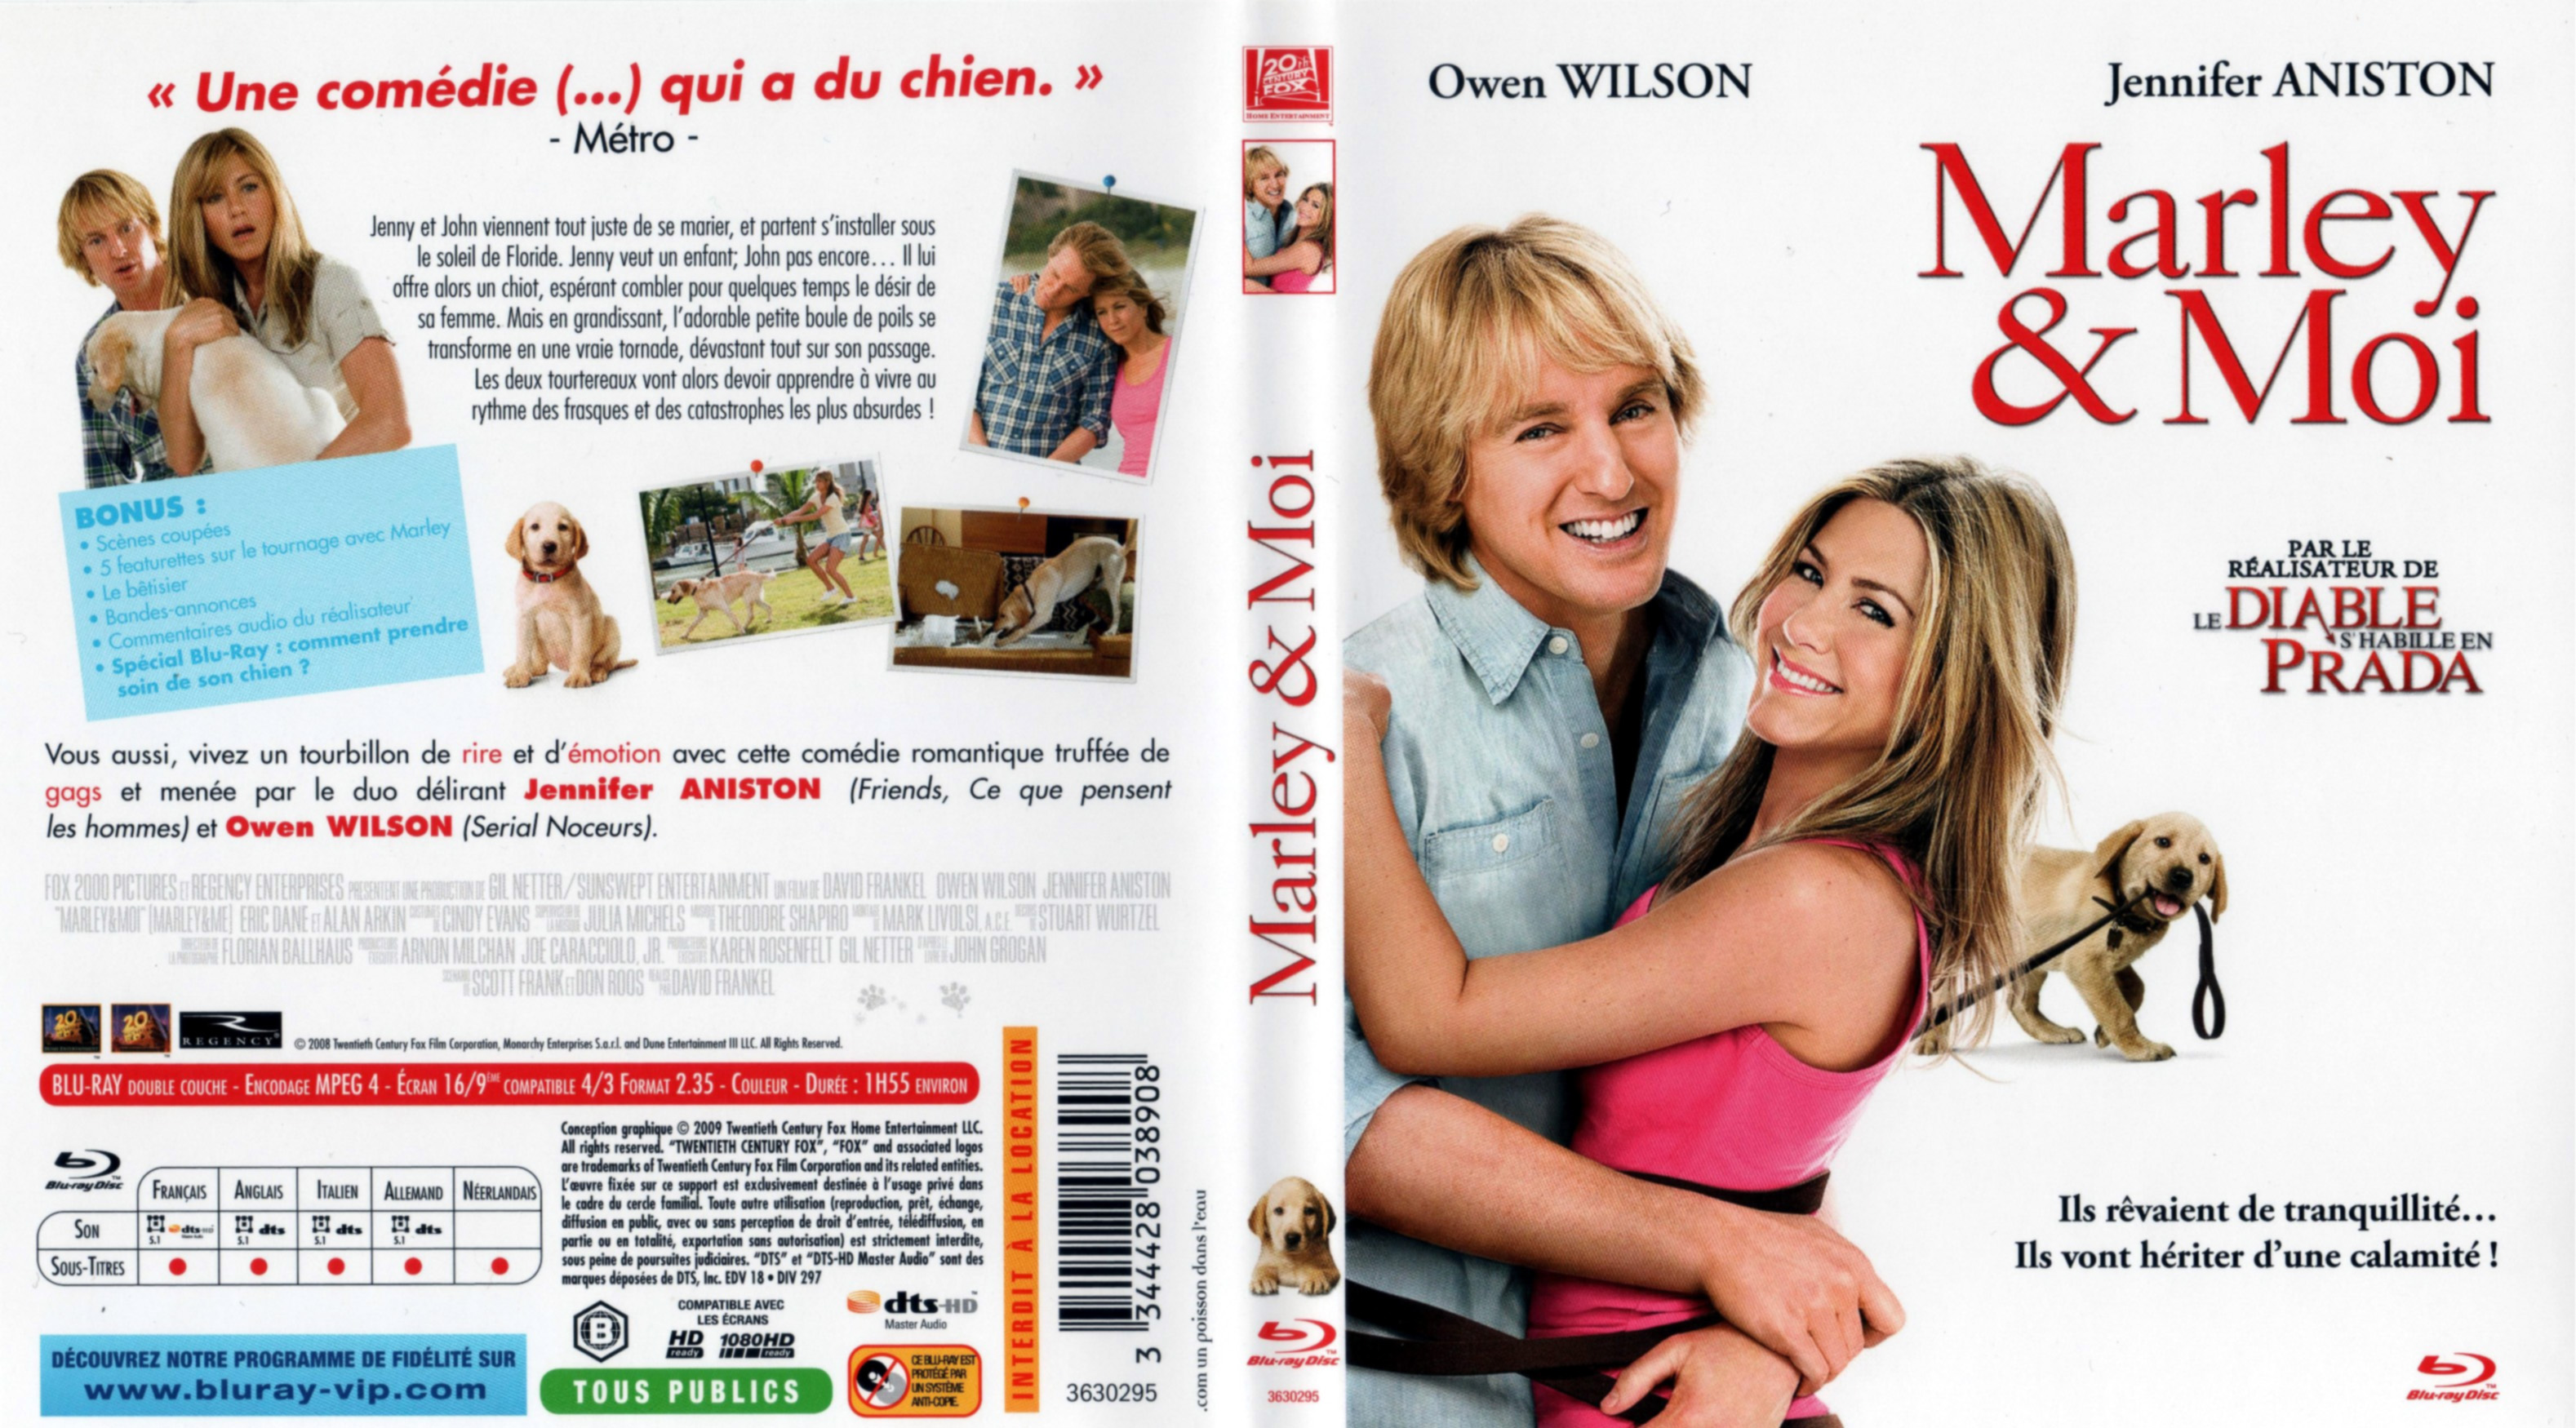 Jaquette DVD Marley et moi (BLU-RAY)